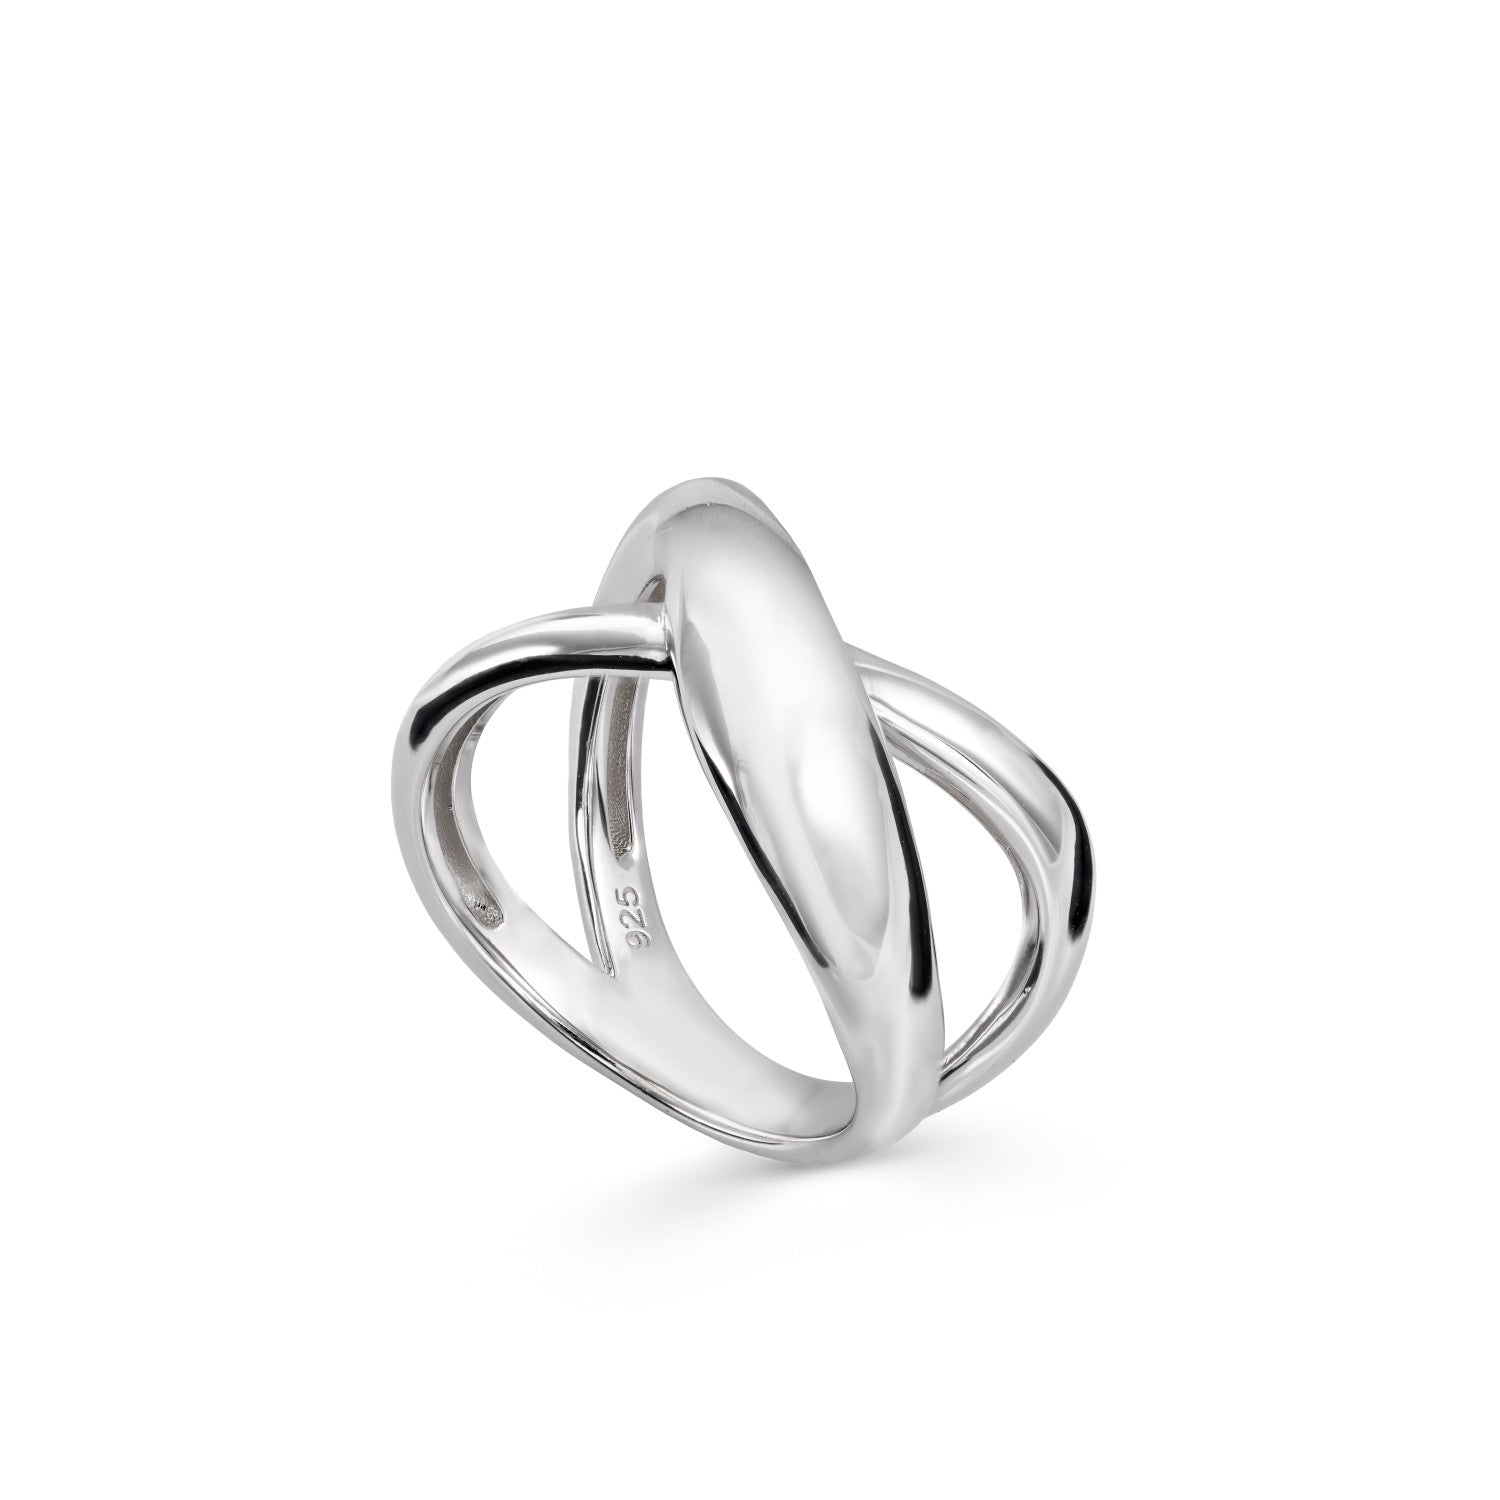 Large double intertwined double lane rings in plain silver